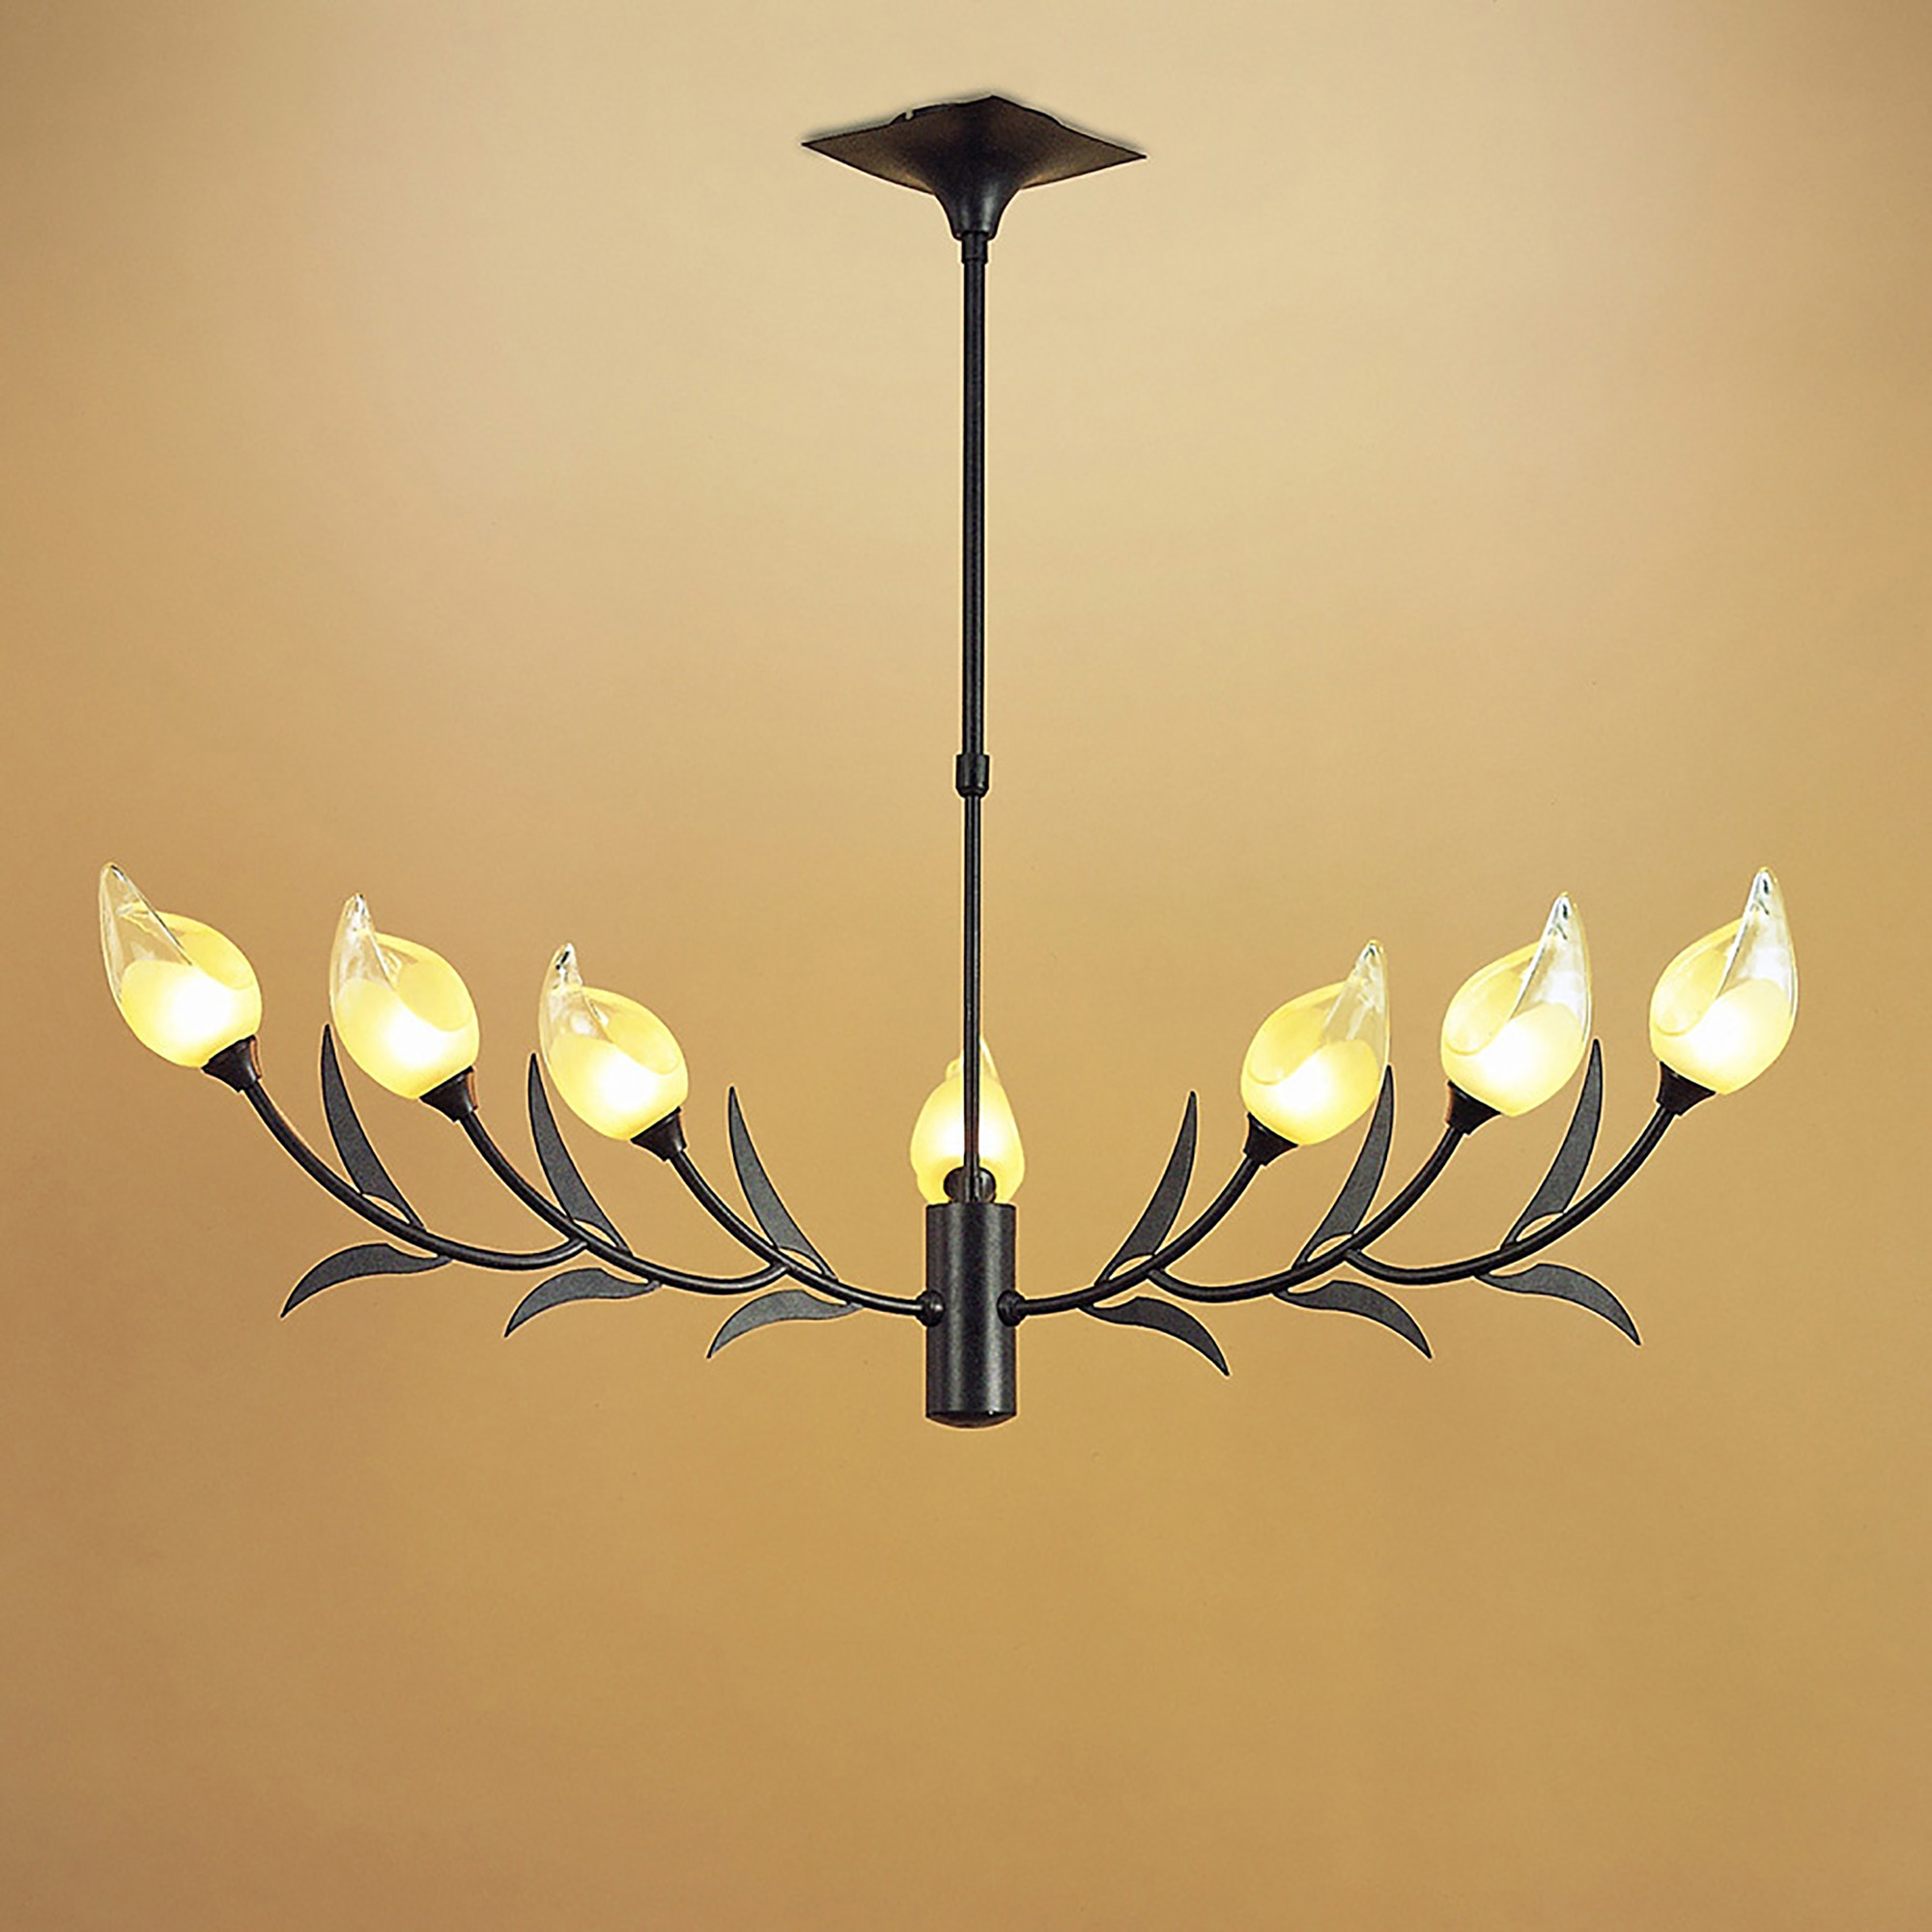 Holland Oxide Ceiling Lights Mantra Multi Arm Fittings